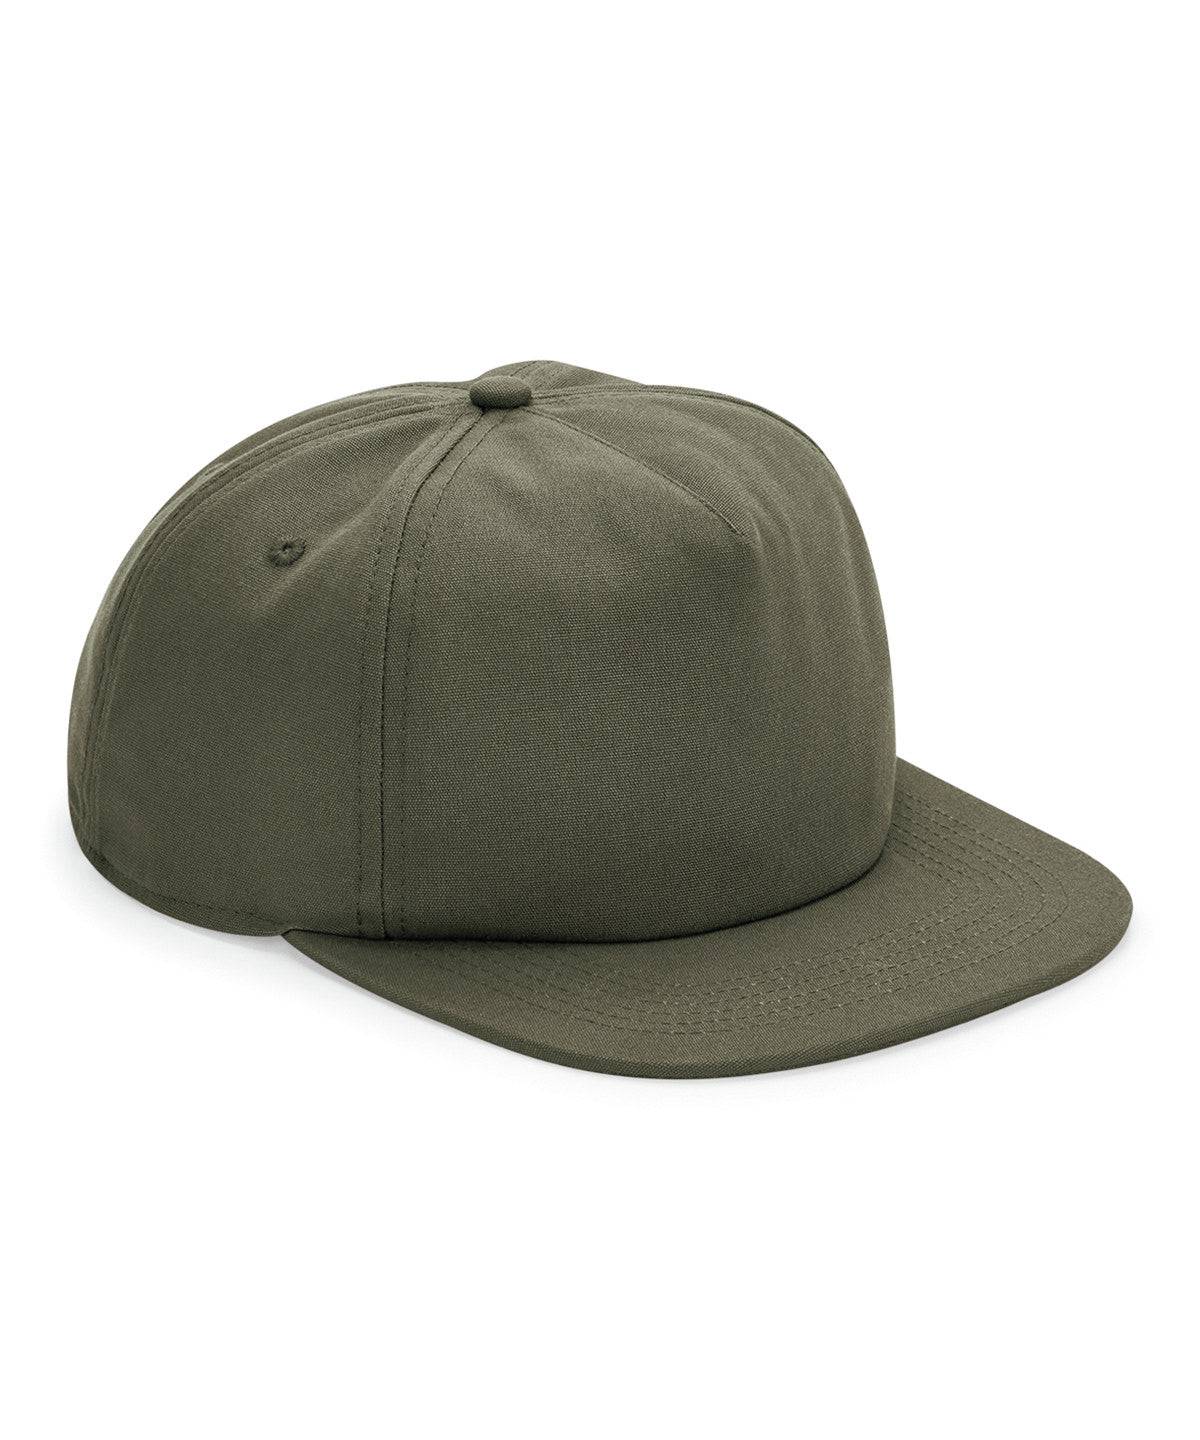 Olive Green - Organic cotton unstructured 5-panel cap